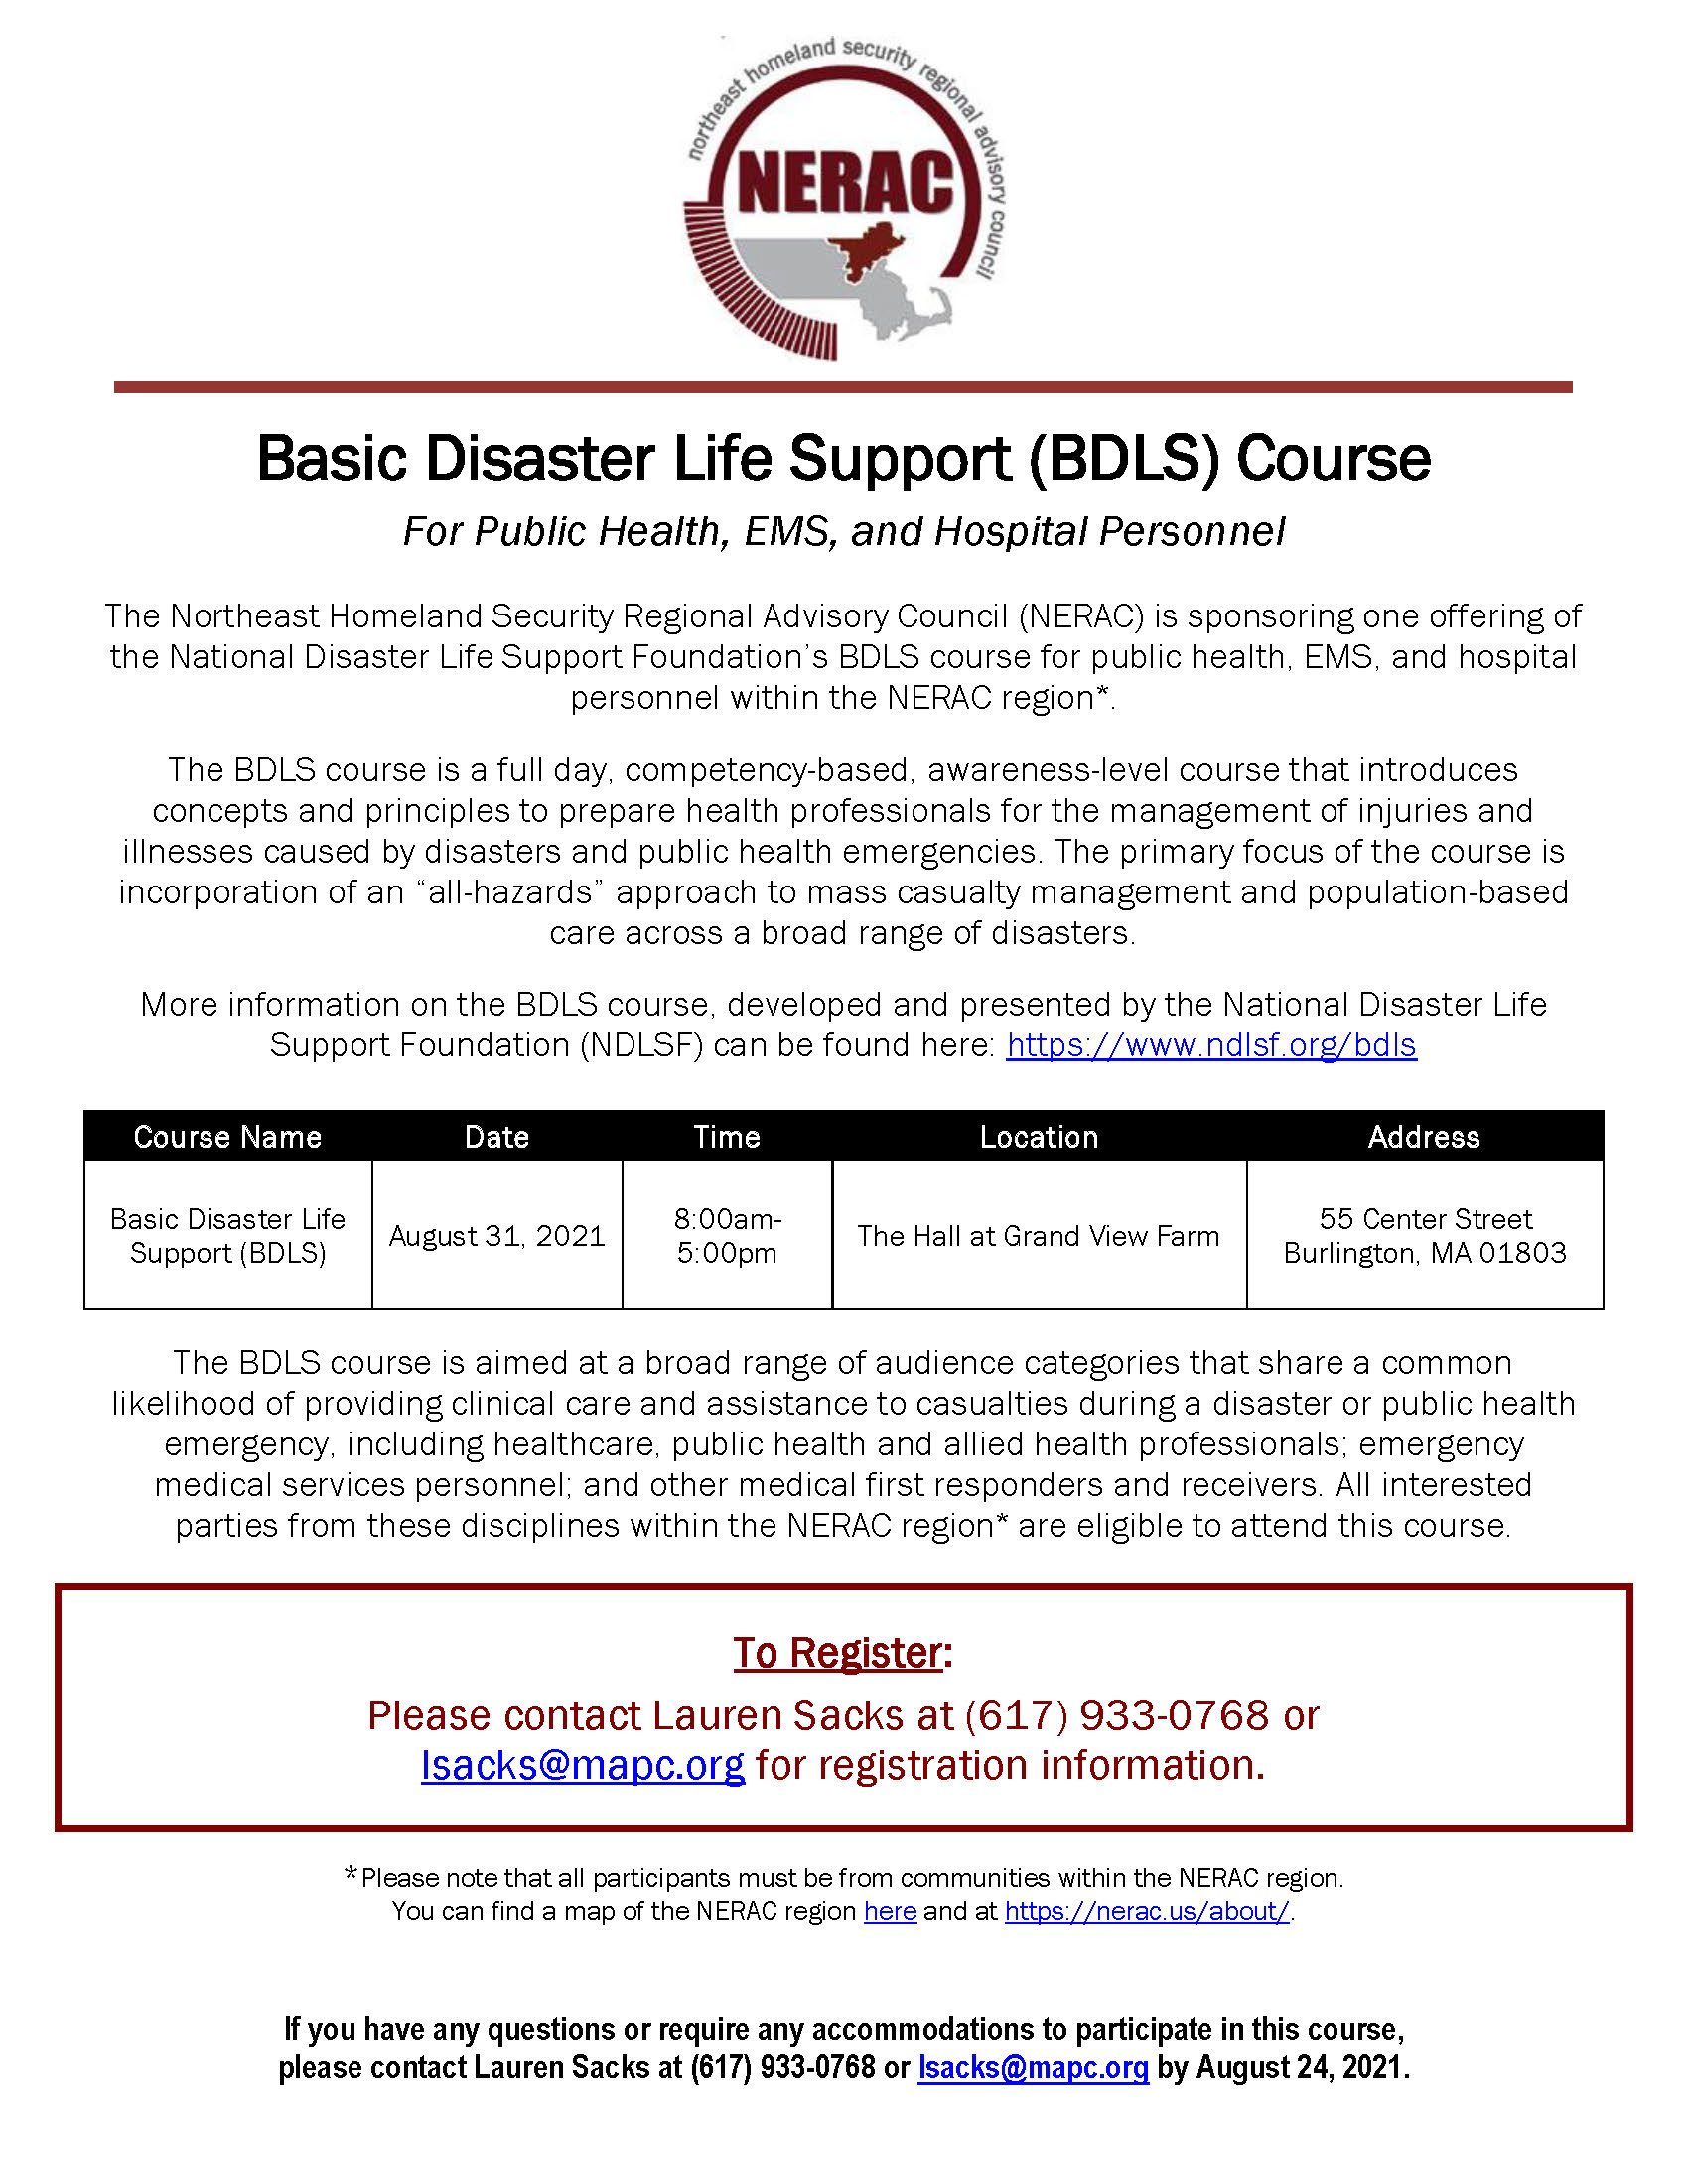 Upcoming Basic Disaster Life Support (BDLS) Course